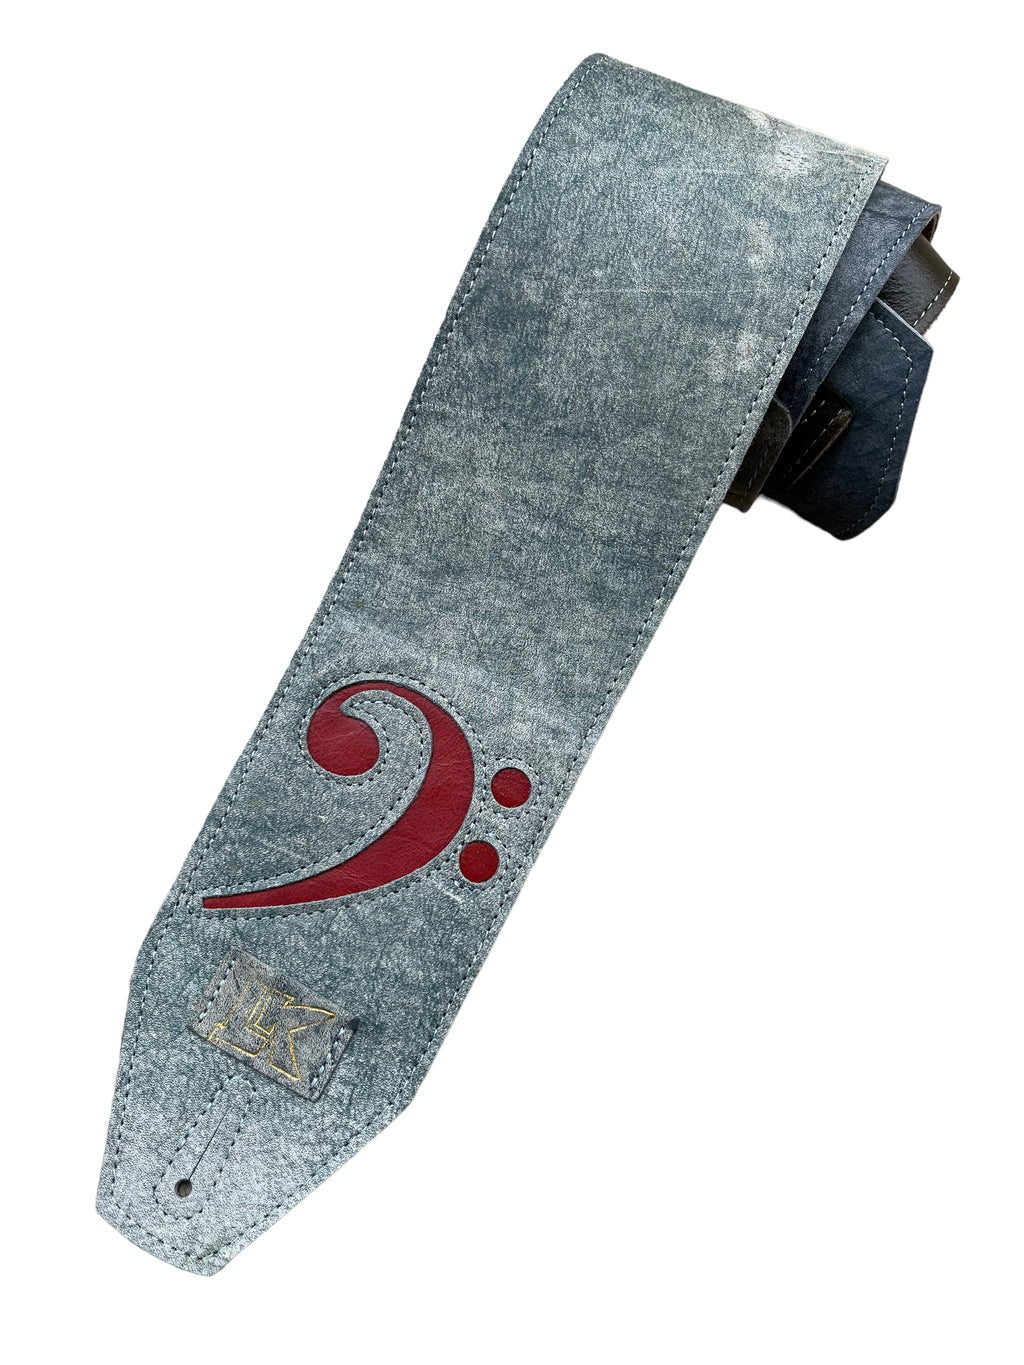 Weekly Strap Sale 4" Wide Jeans Strap With Red F Clef LK Strap LIMITED EDITION !